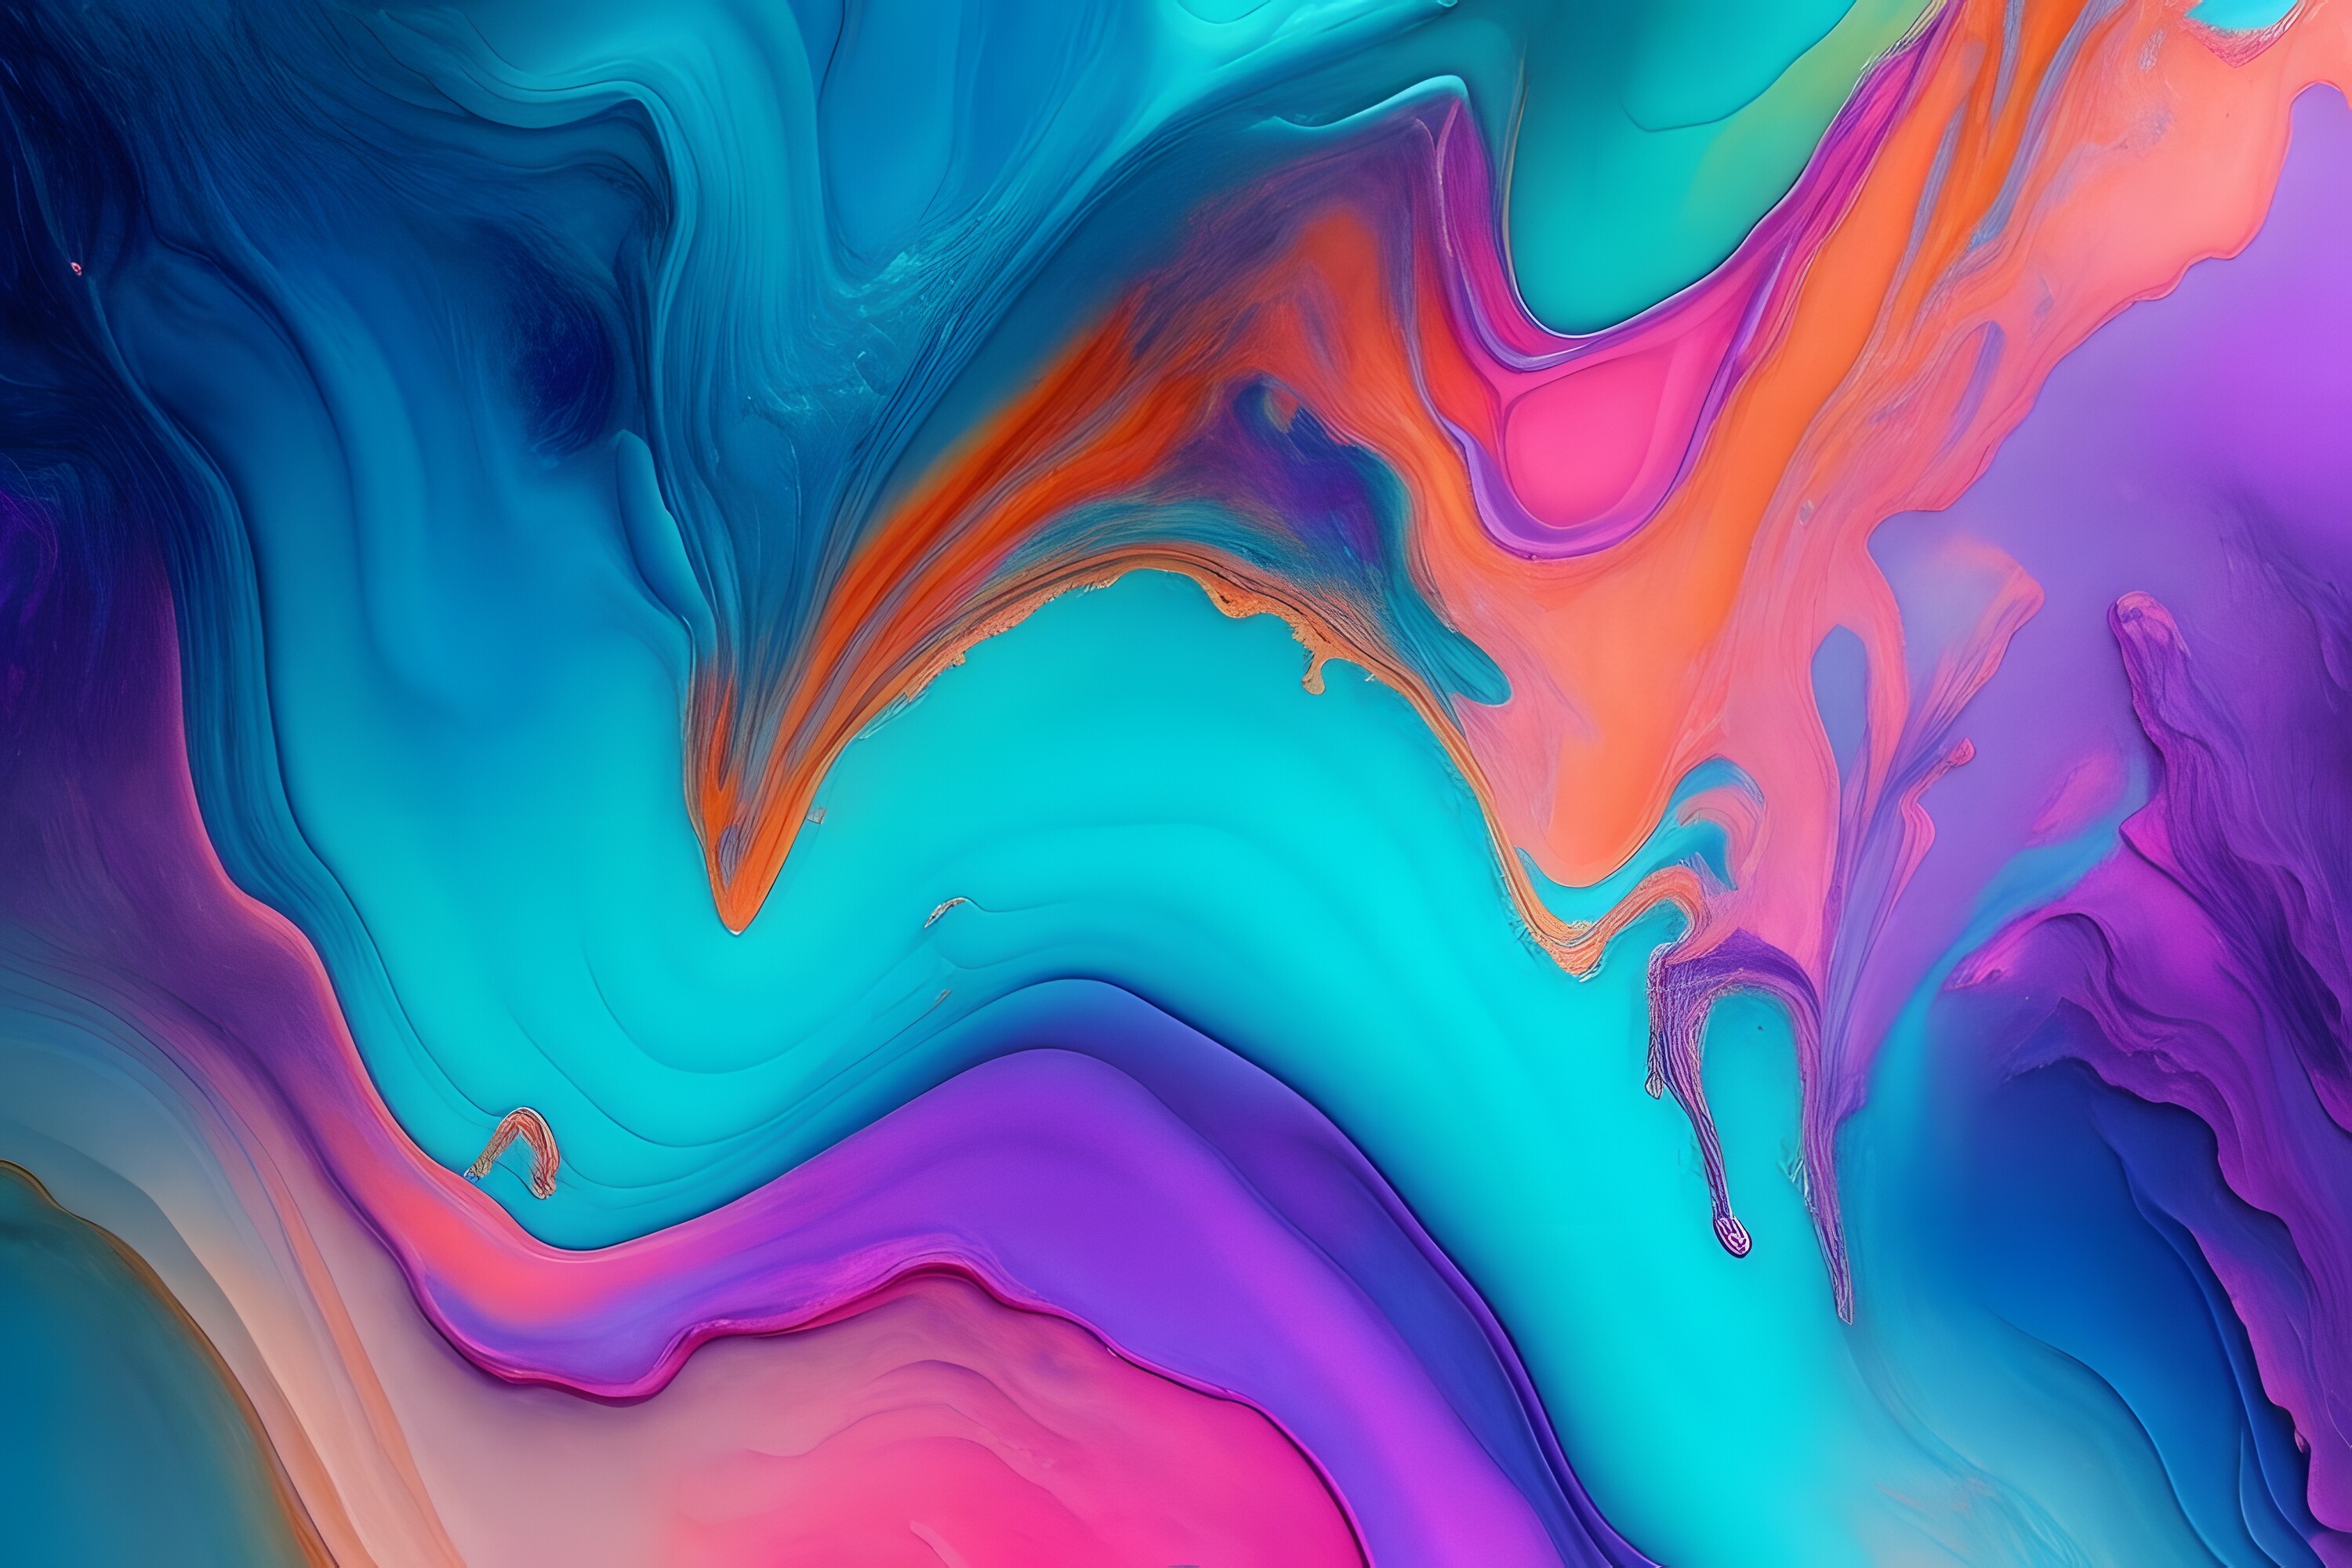 Iridescent Liquid Paint Texture Graphic by Forhadx5 · Creative Fabrica